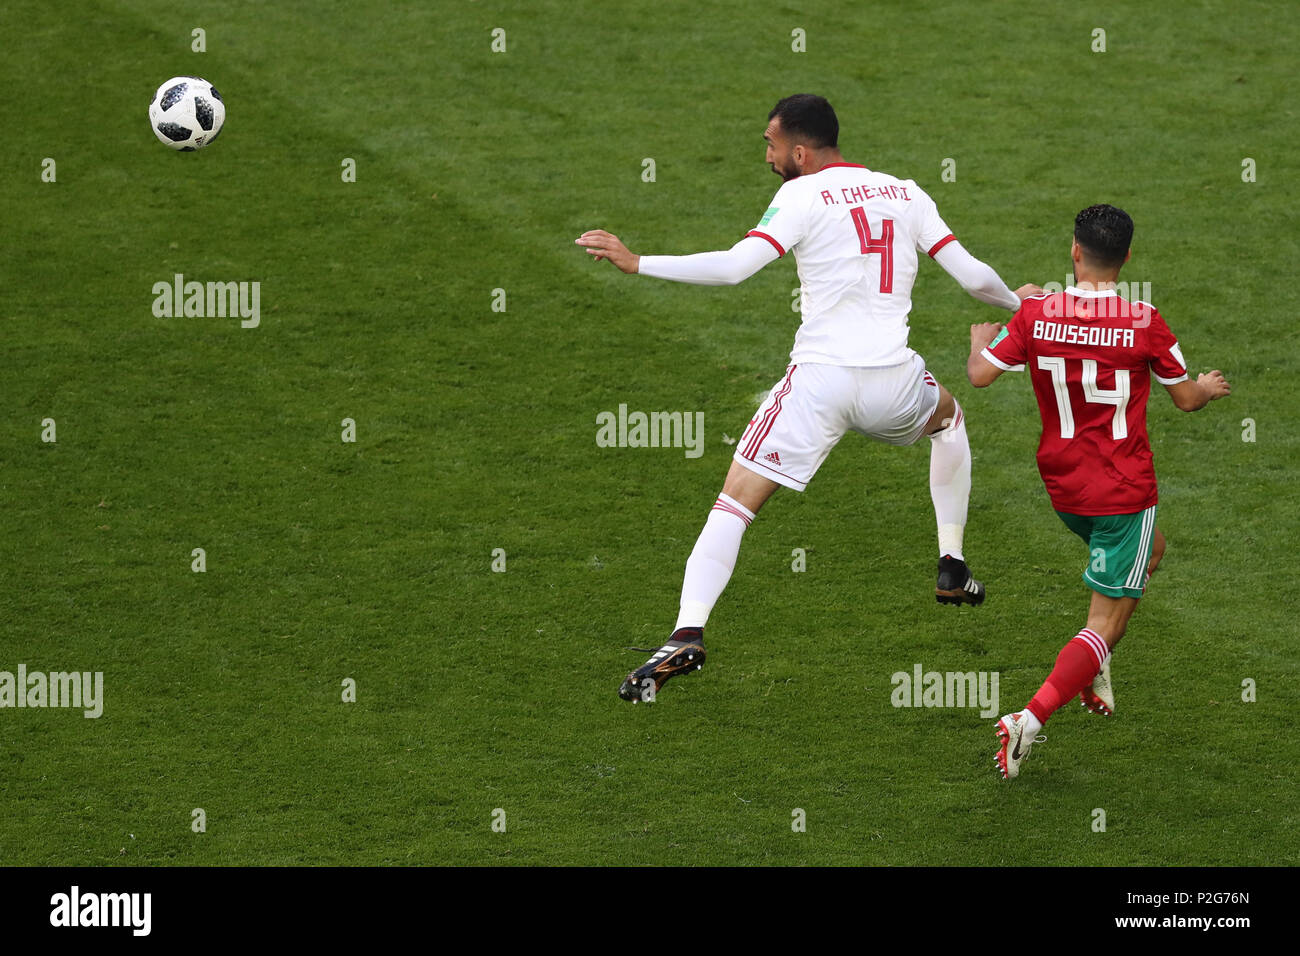 Saint Petersburg, Russia. 15th June, 2018. Morocco's Mbark Boussoufa (R) and Iran's Rouzbeh Cheshmi vie for the ball during the FIFA World Cup 2018 Group B soccer match between Iran and Morocco at the Saint Petersburg Stadium, in Saint Petersburg, Russia, 15 June 2018. Credit: Saeid Zareian/dpa/Alamy Live News Stock Photo